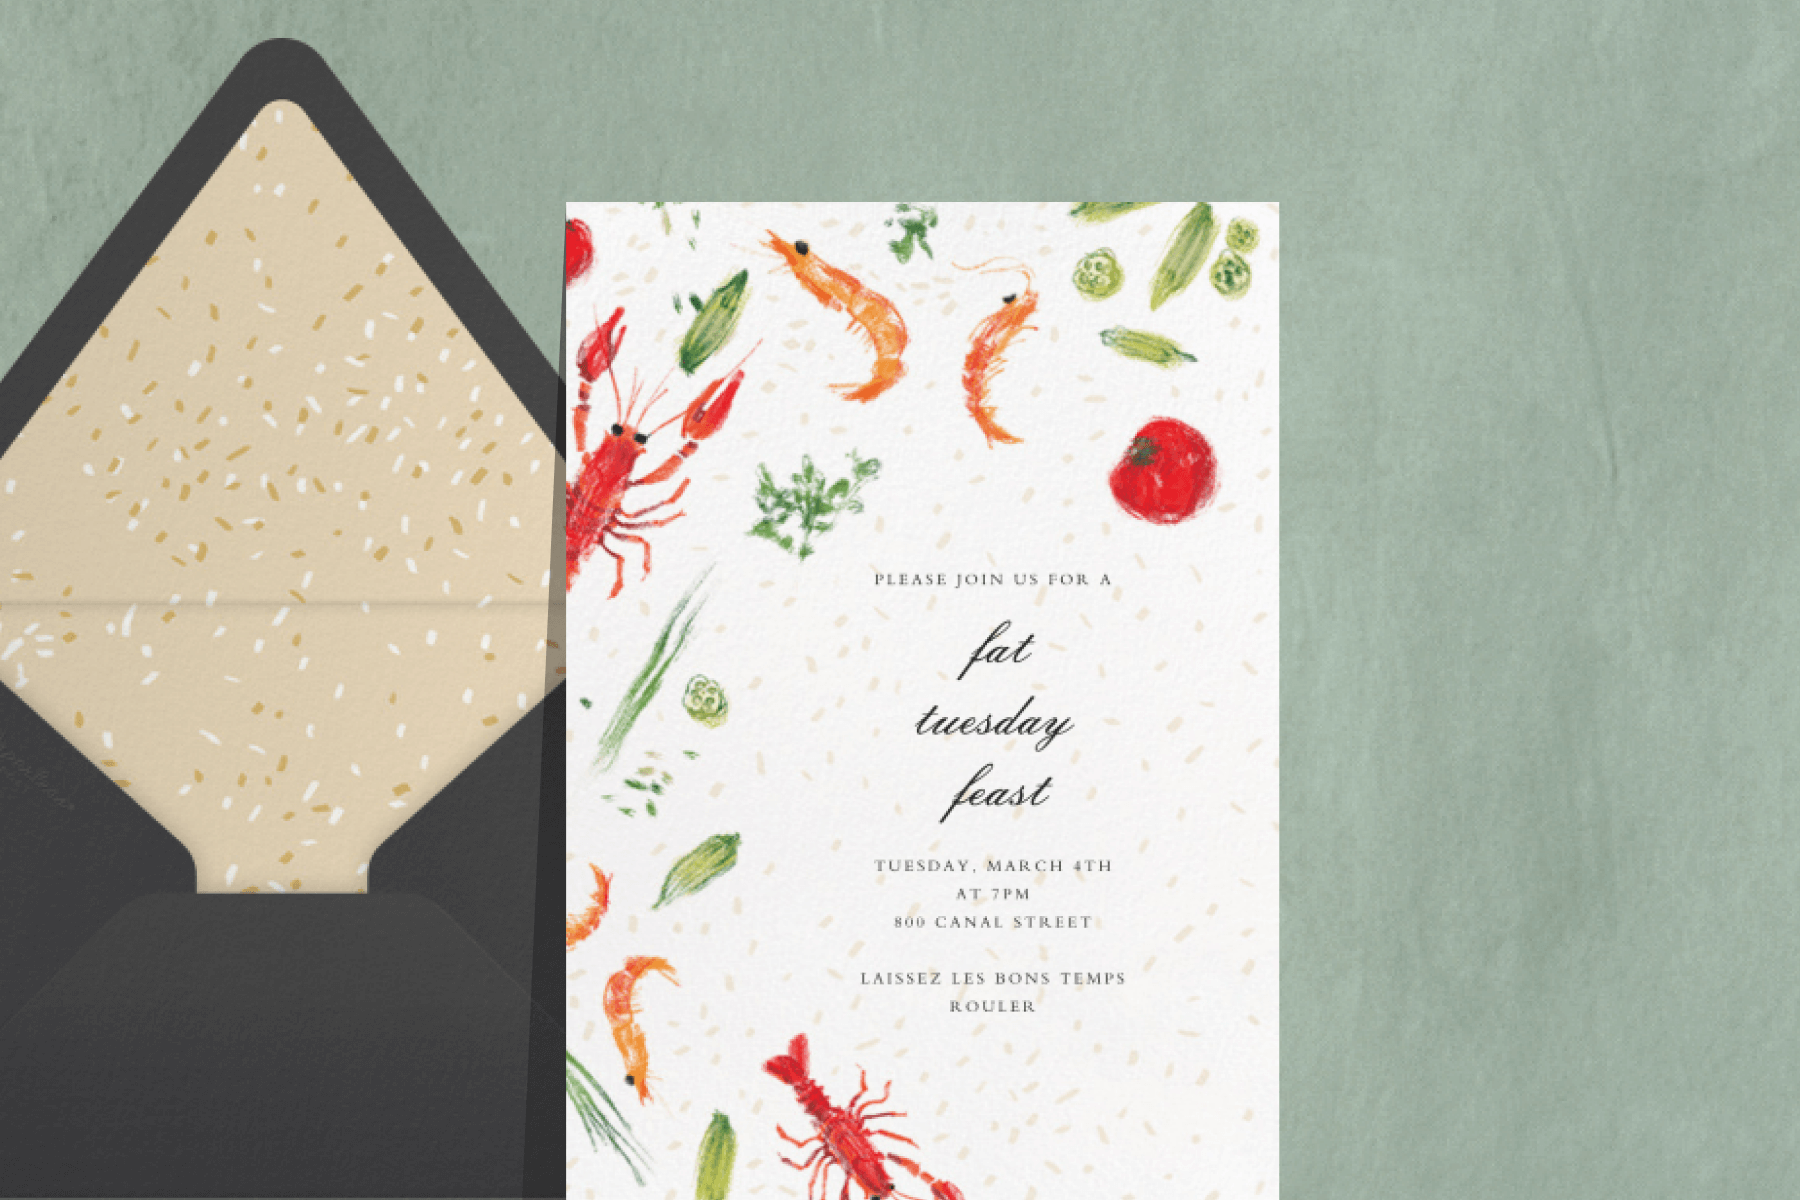 A dinner party invitation featuring illustrated gumbo ingredients.